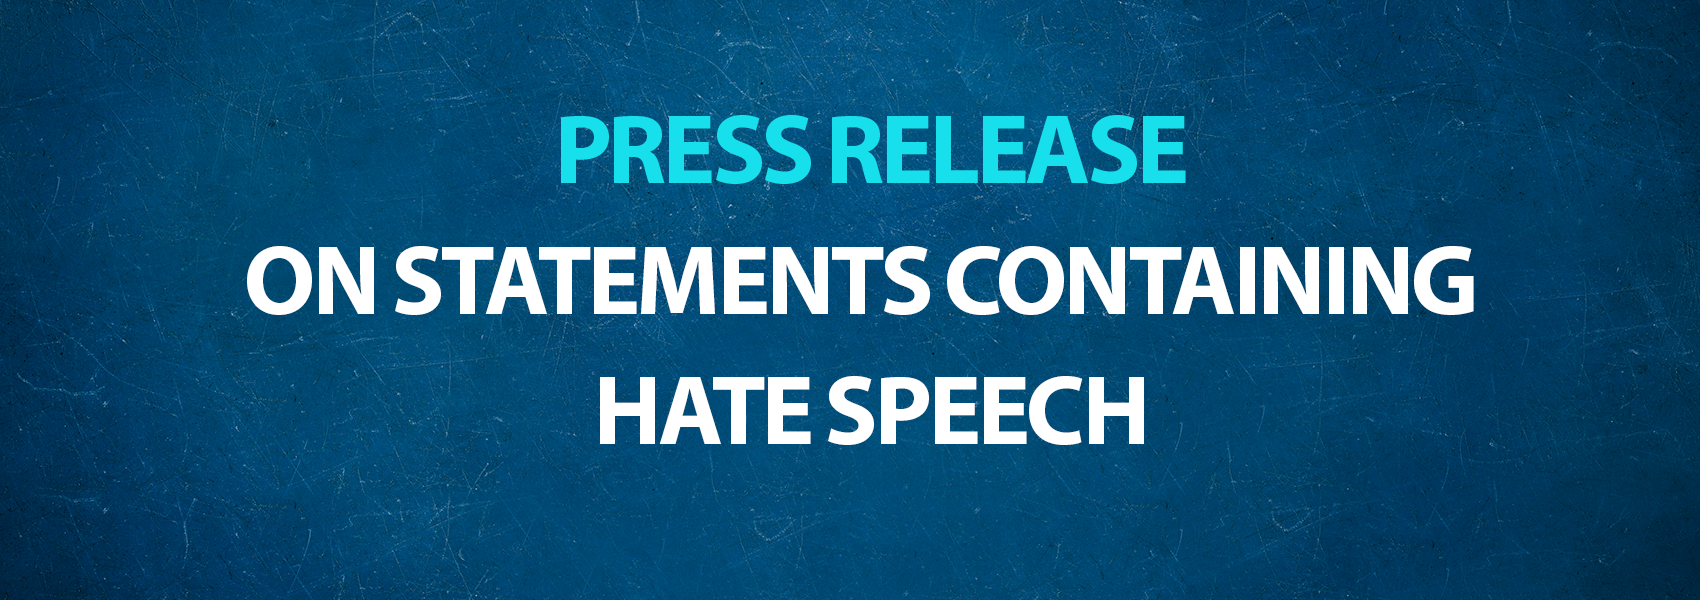 Press Release on Statements Containing Hate Speech